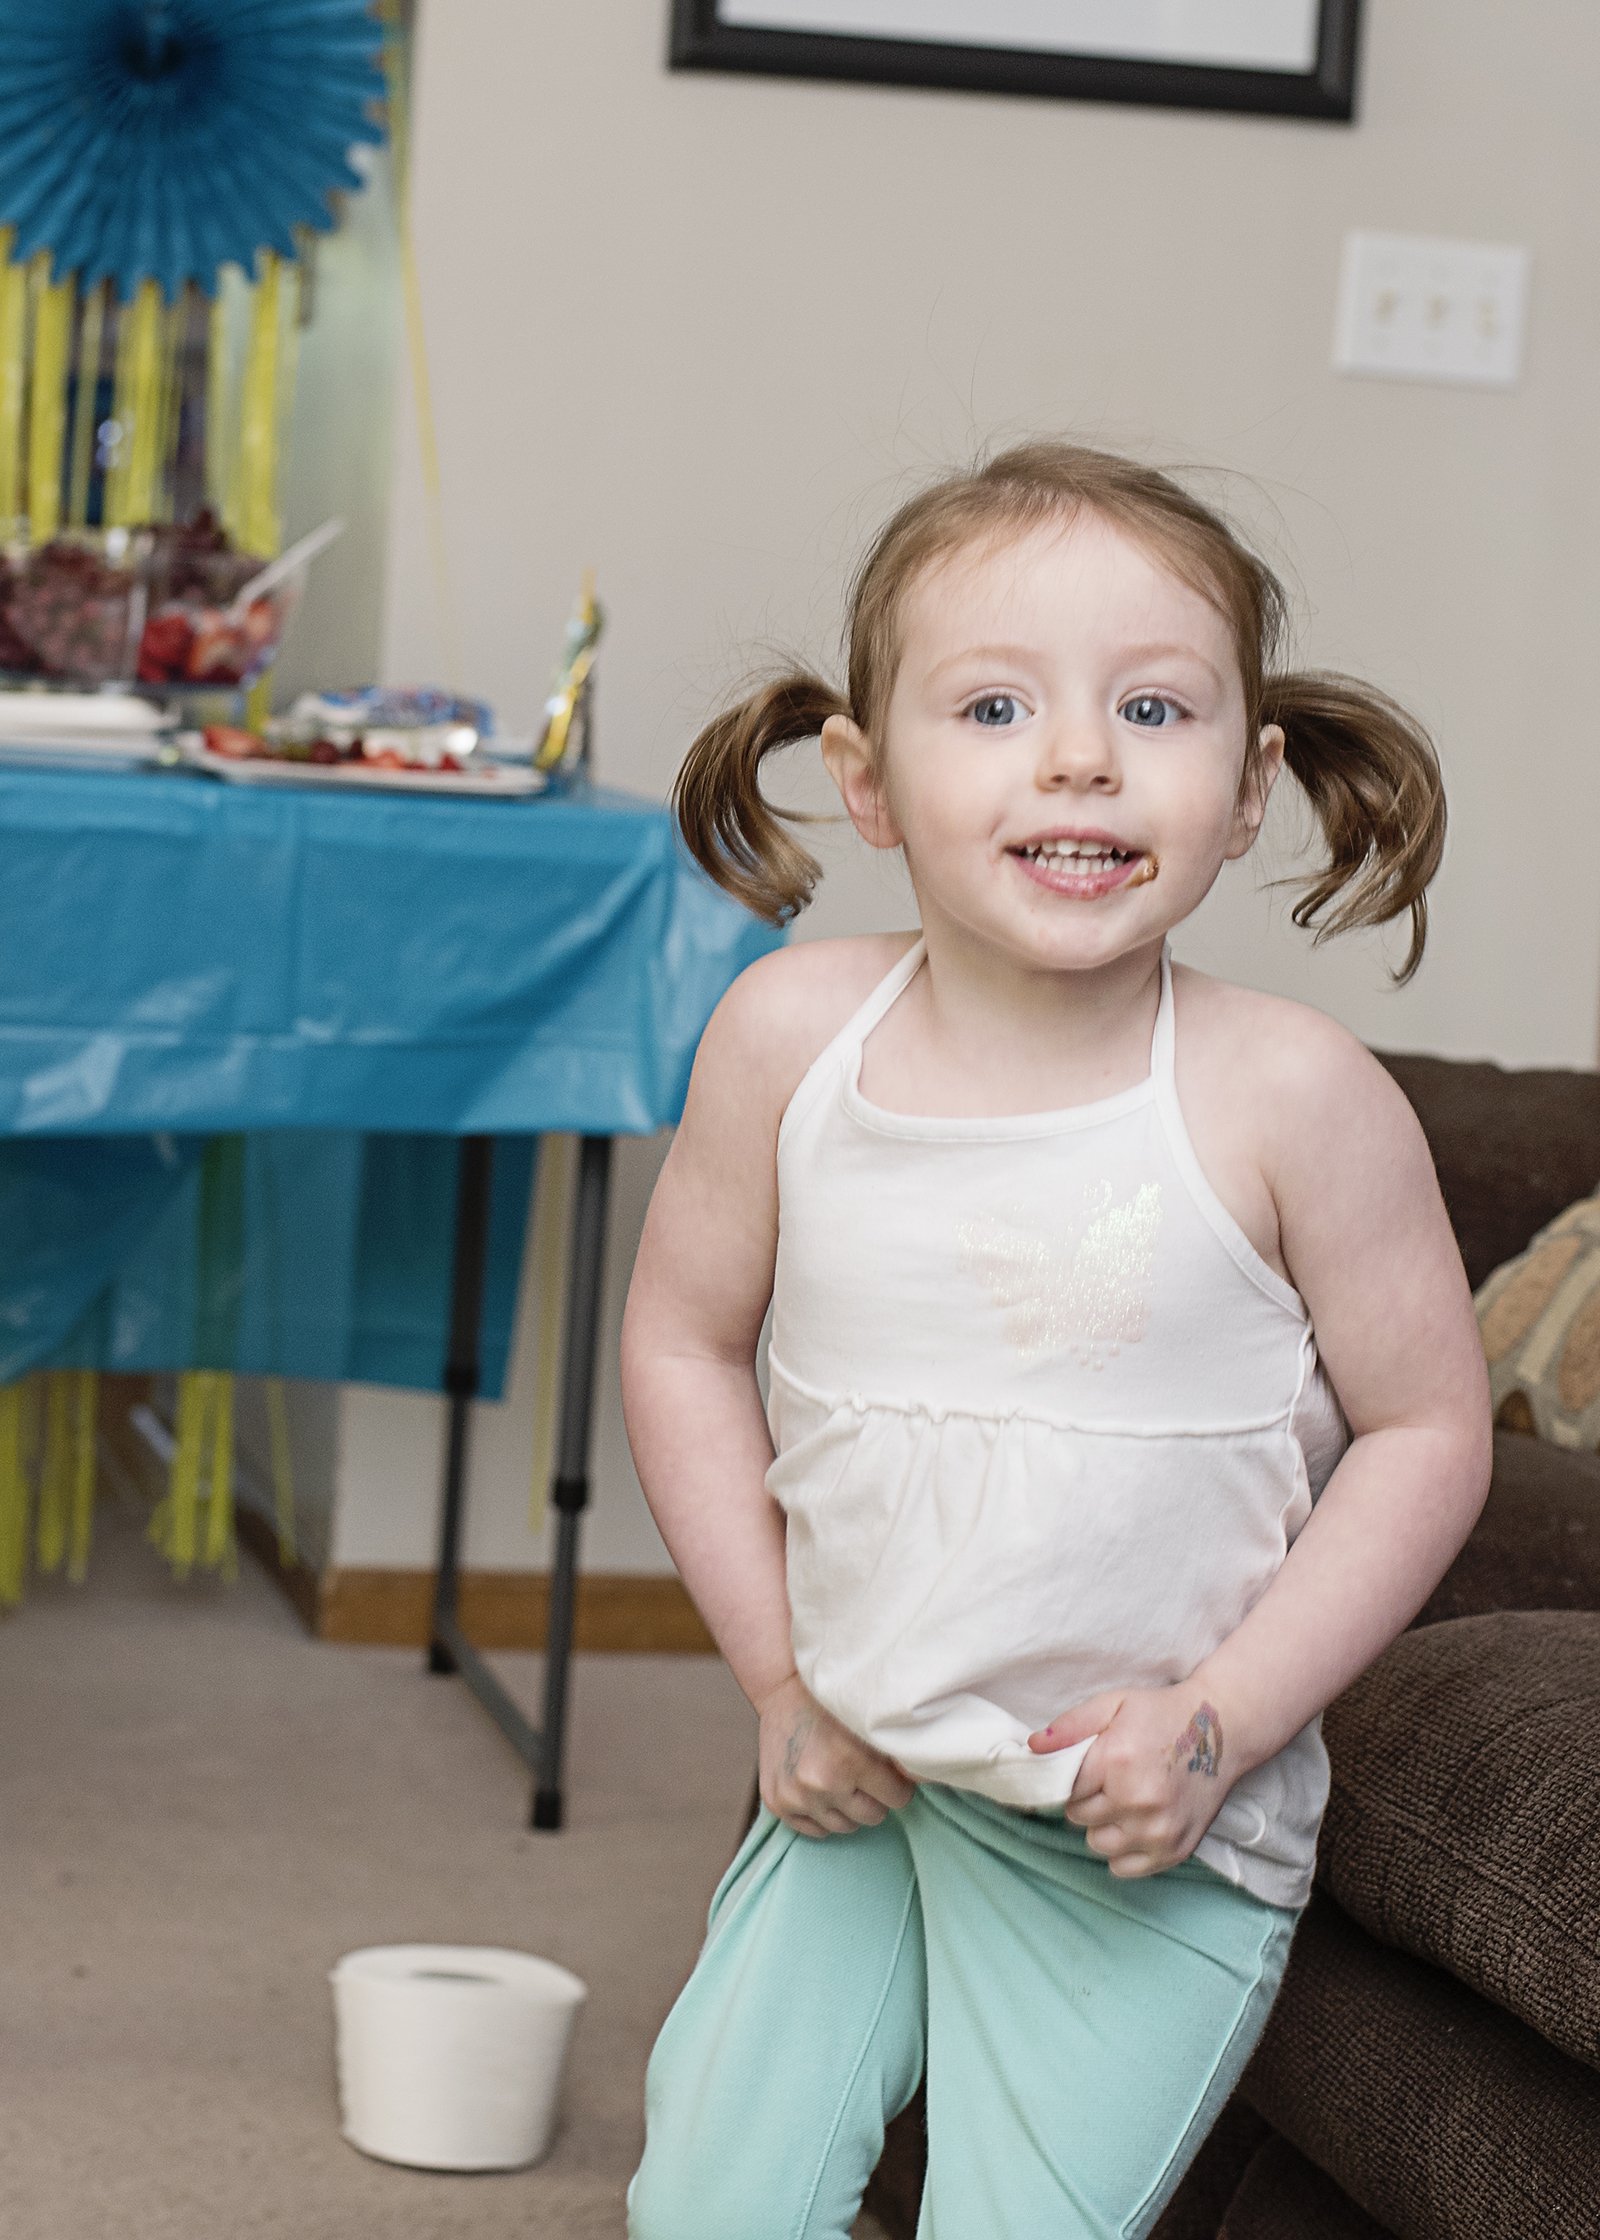 5 Tried and True Potty Training Tips from Moms